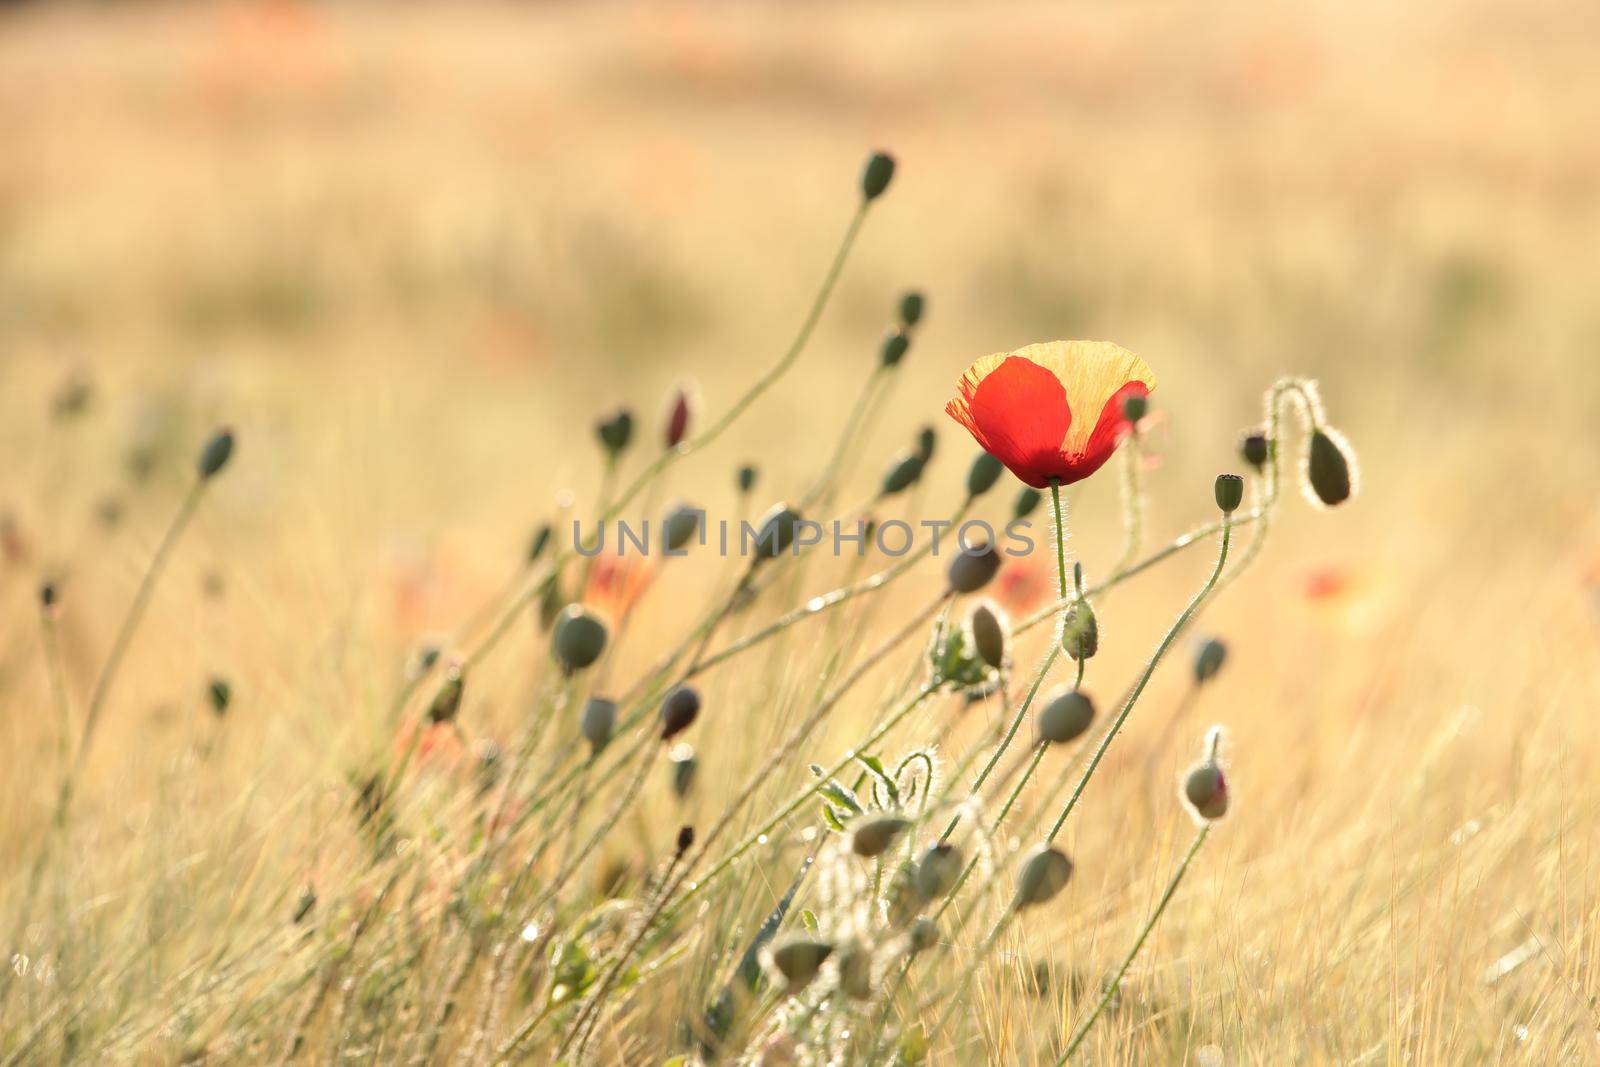 Poppy in the field at sunrise.